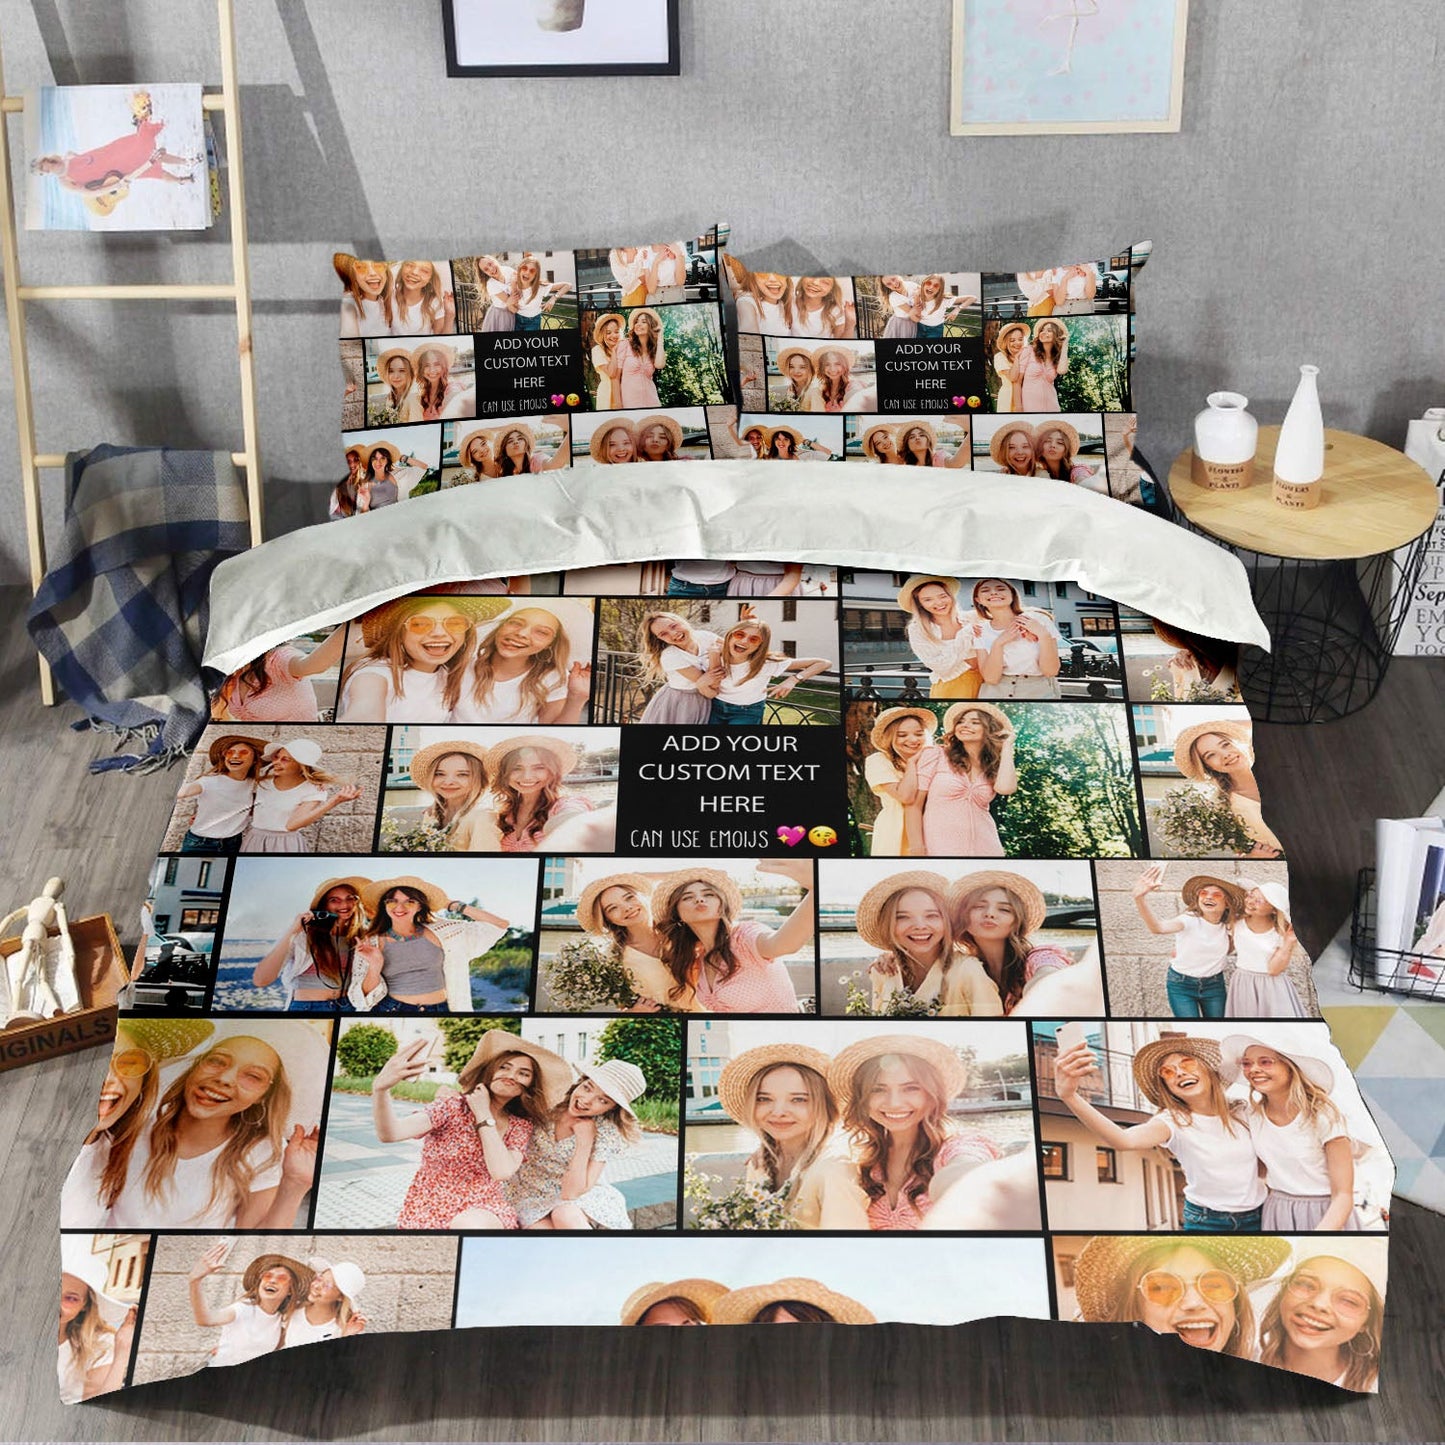 Create a Gift for Best Friend with Collage Photo & Text on Bedding Set